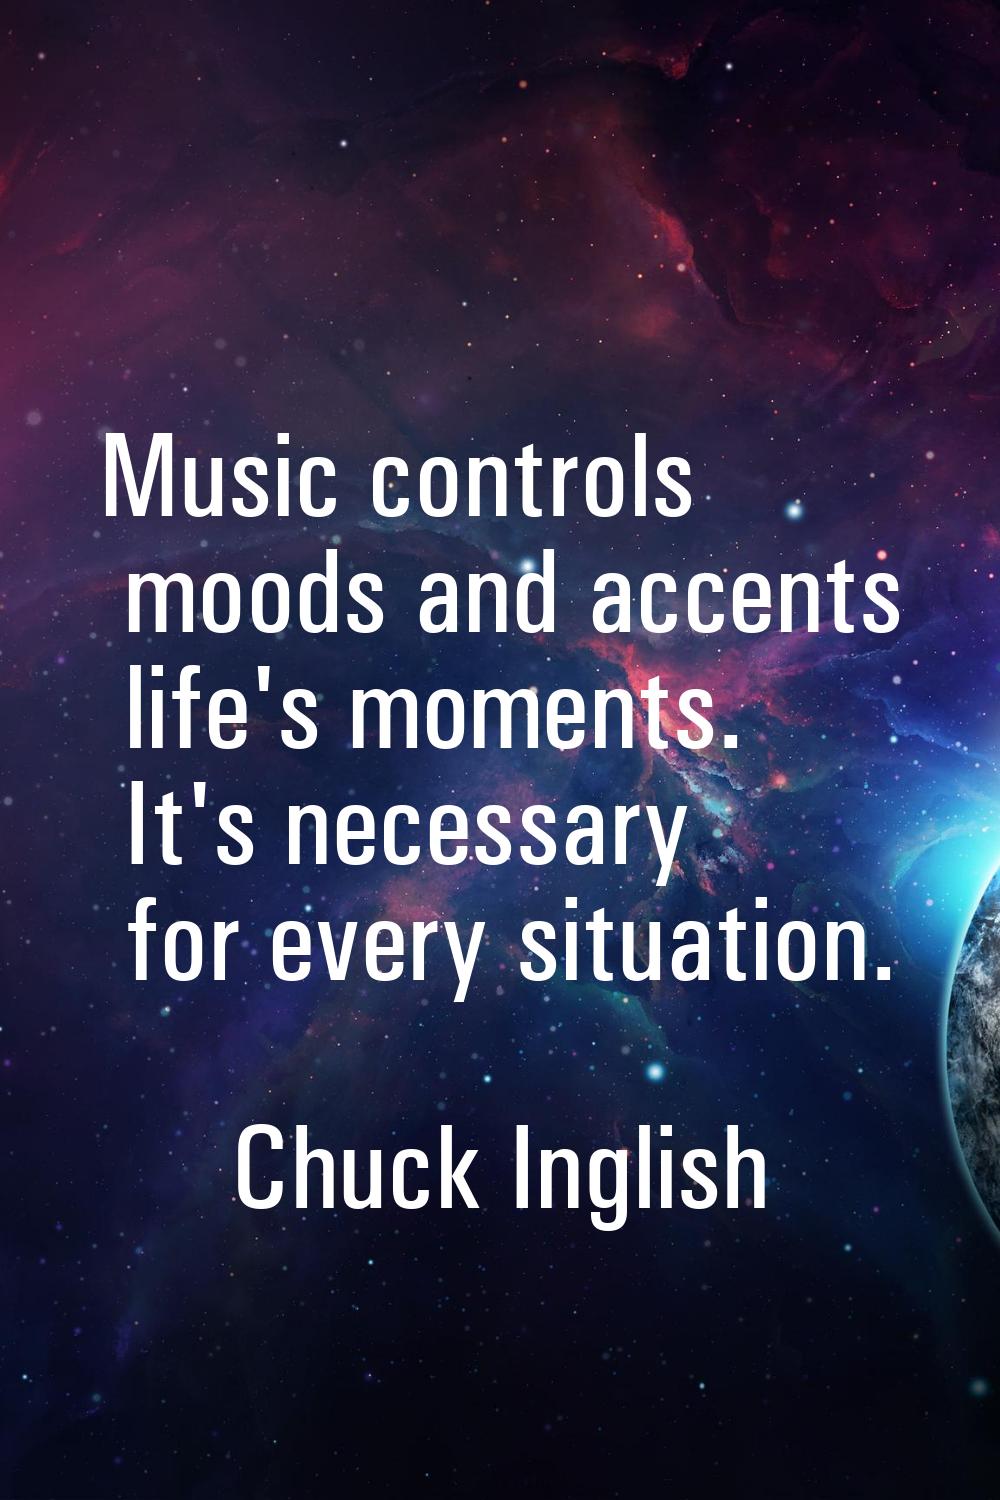 Music controls moods and accents life's moments. It's necessary for every situation.